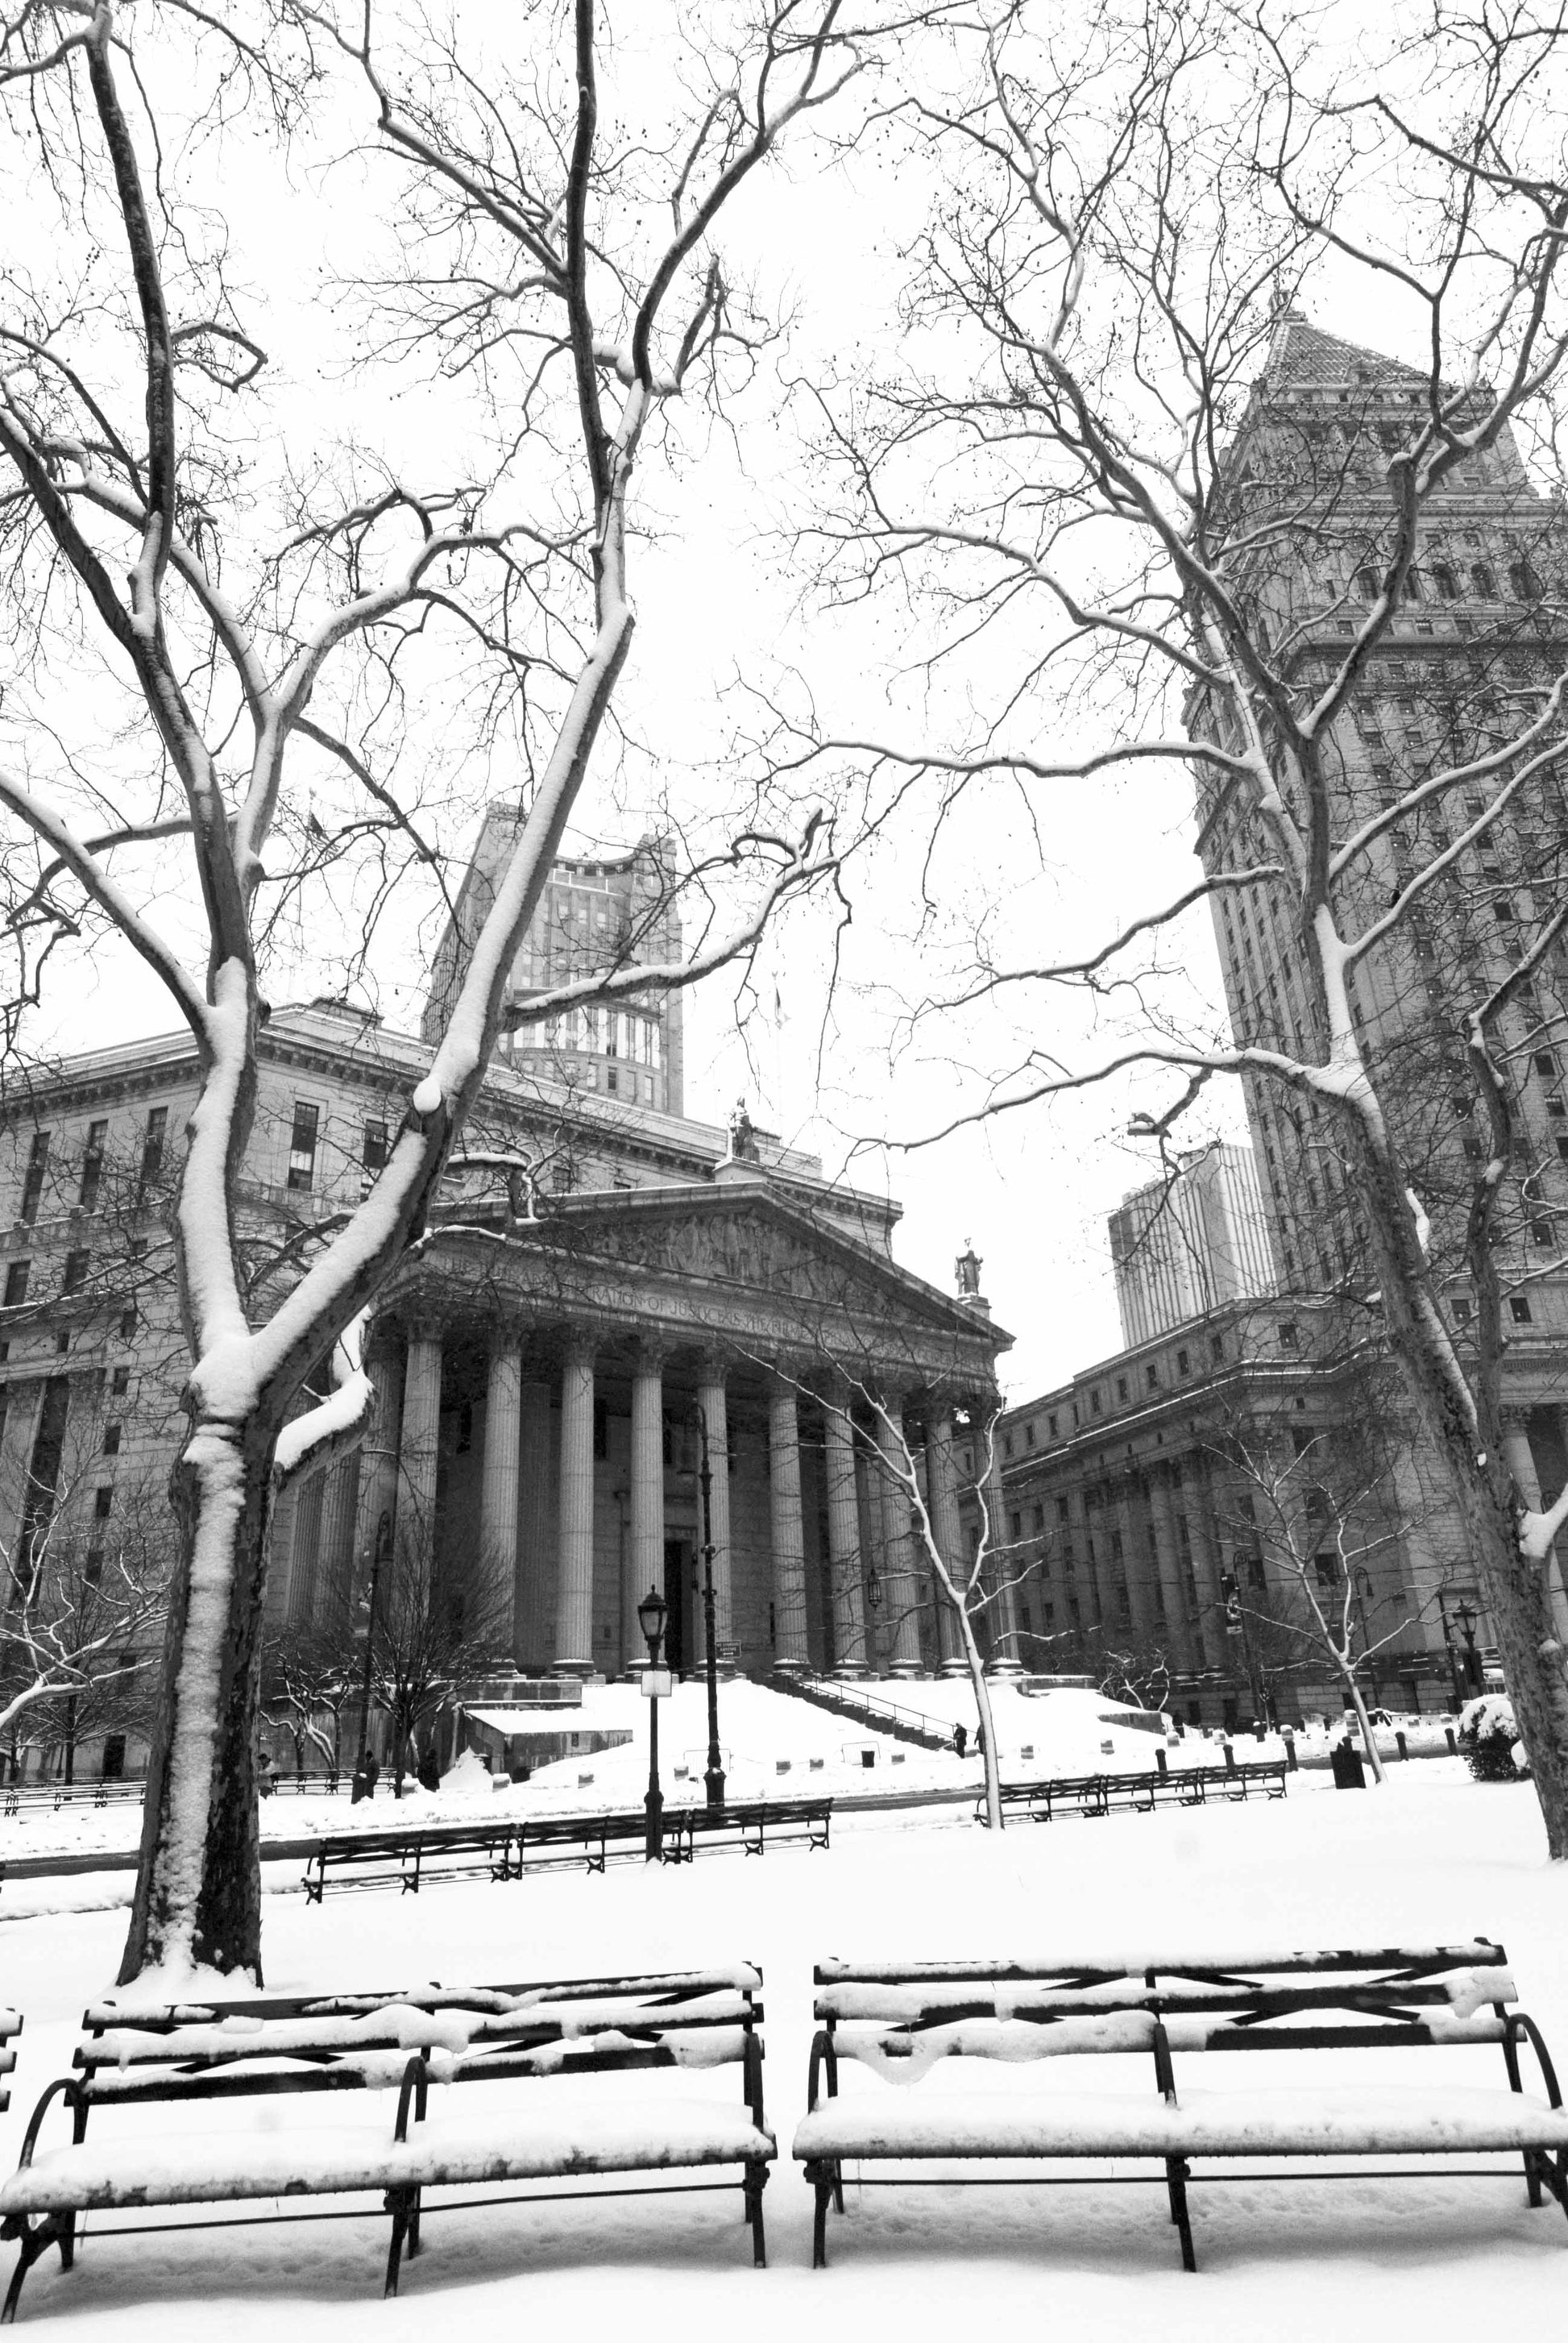 Alessandra Mattanza | BENCHES, New York County Courthouse, New York. A wintery view of the New York County Courthouse seen from Thomas Paine Park. Available as an art print or as a photographic print on acrylic glass.